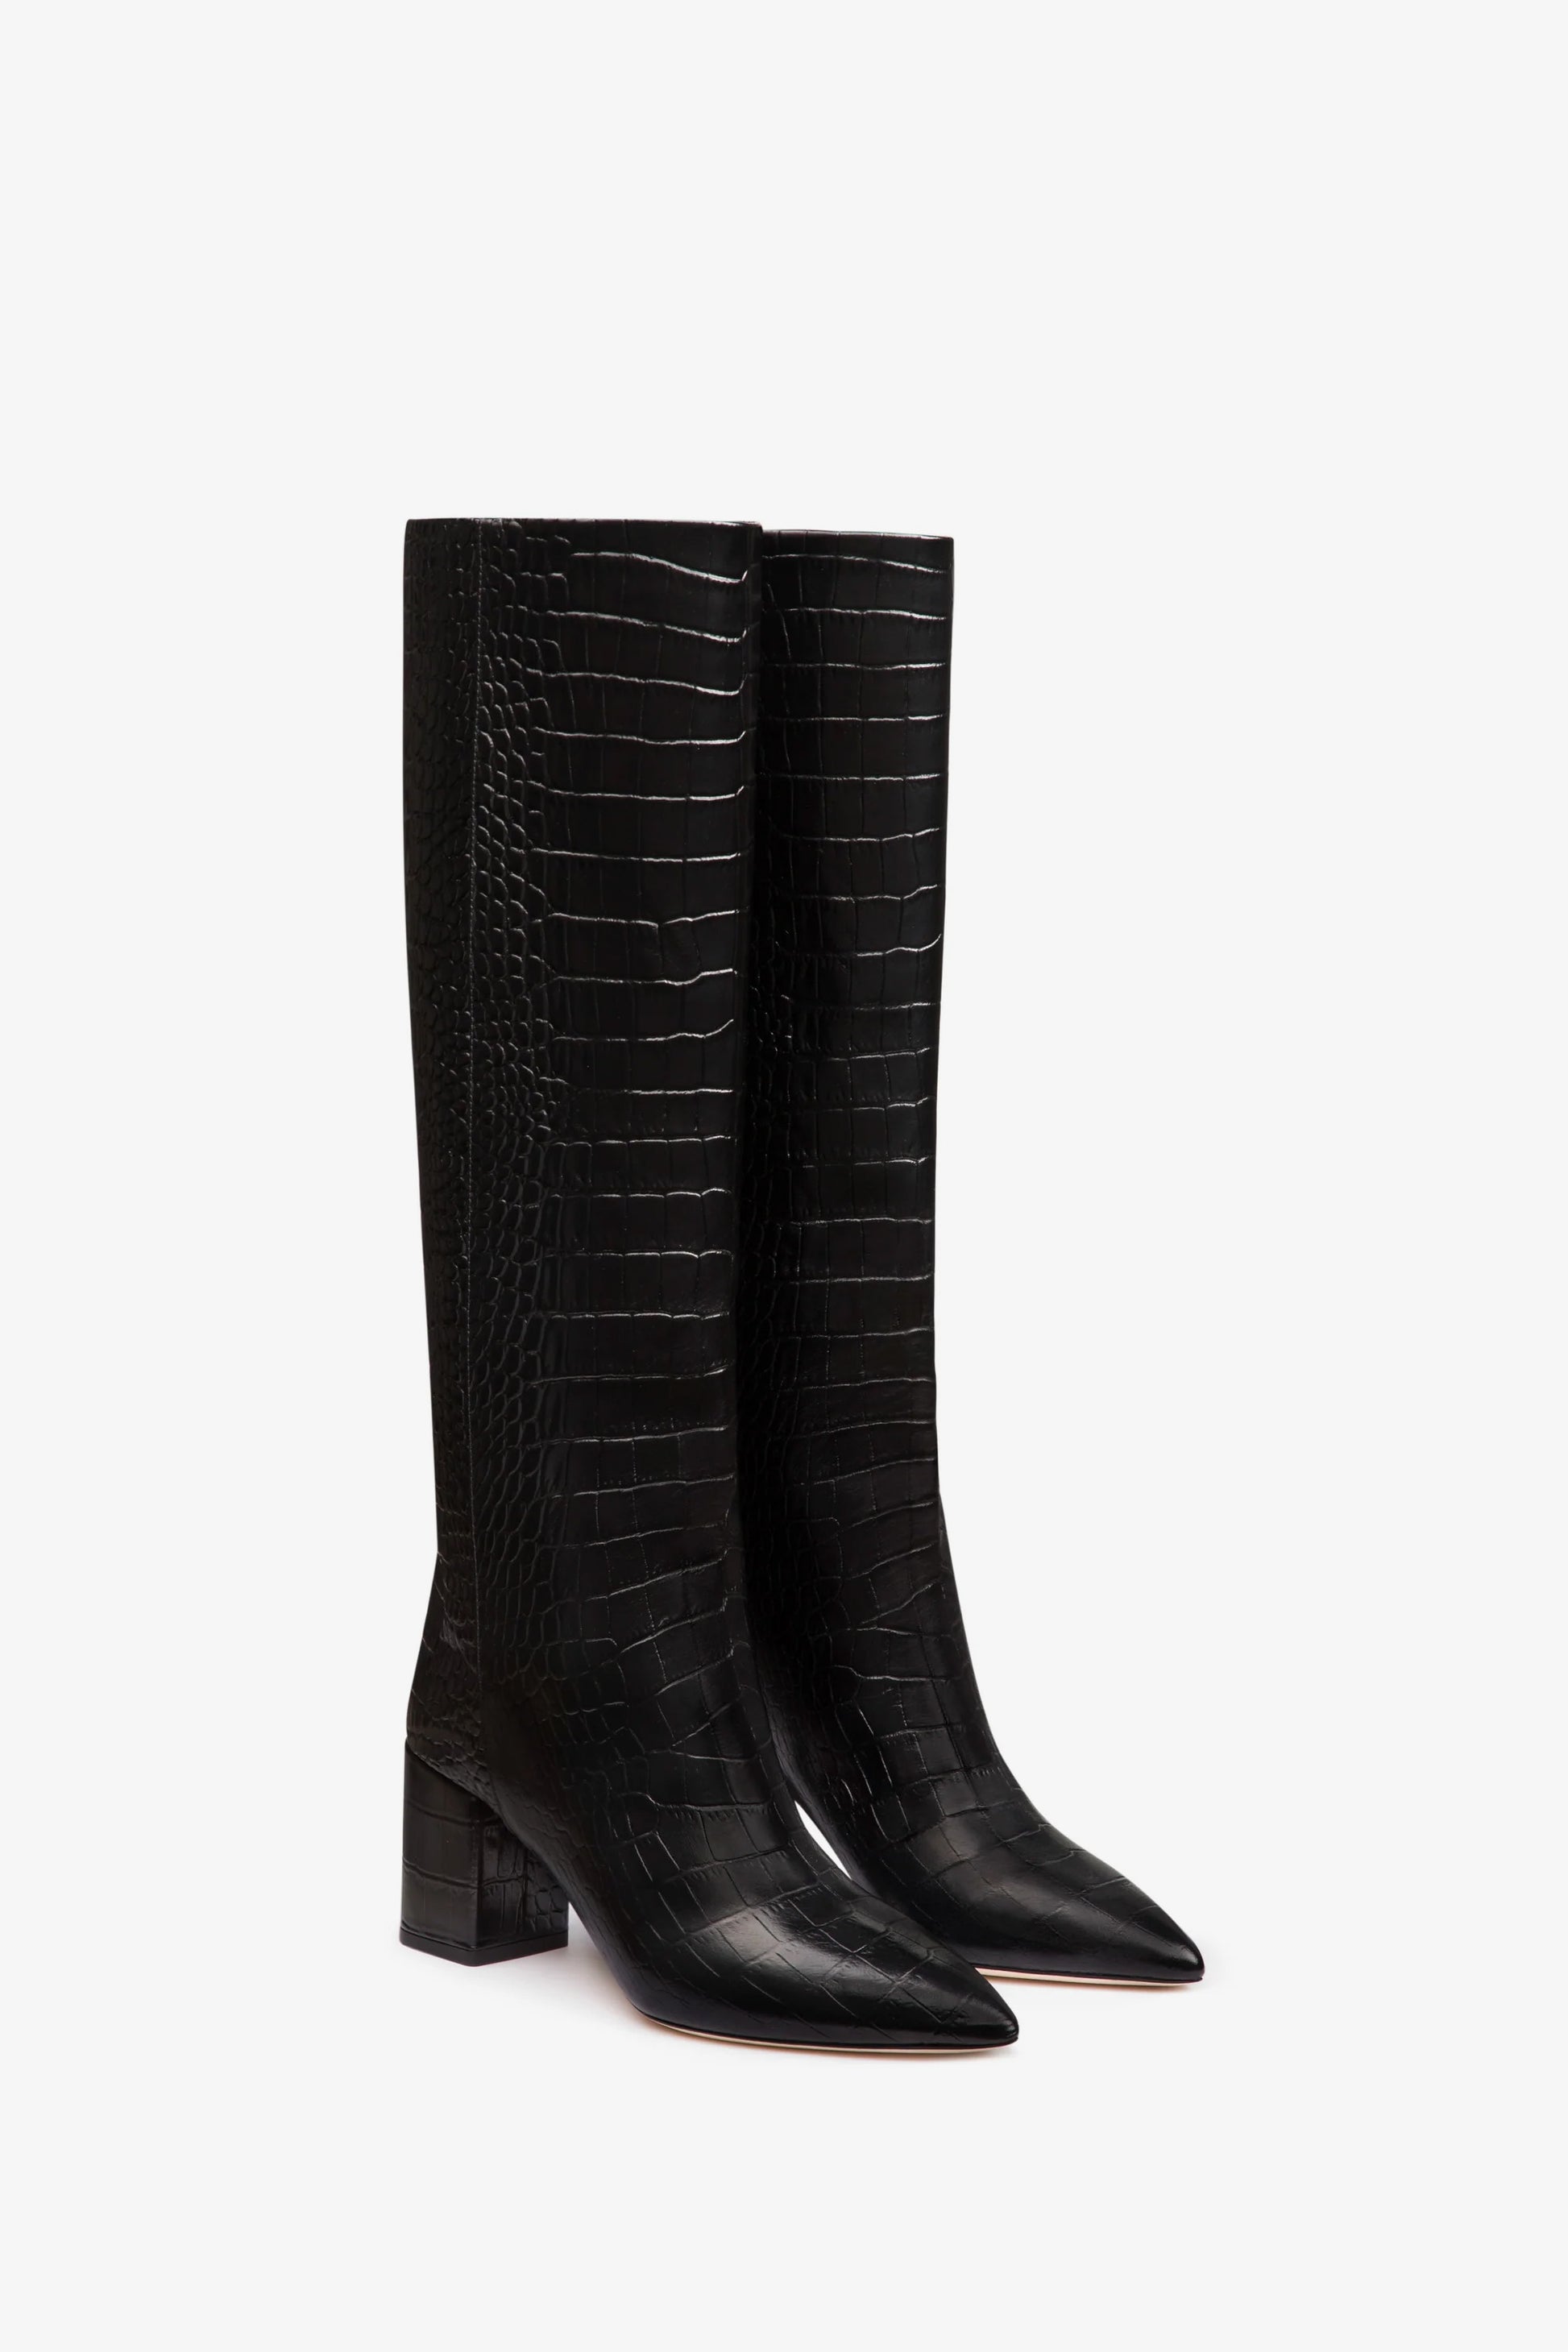 Carbon embossed leather boot - Front